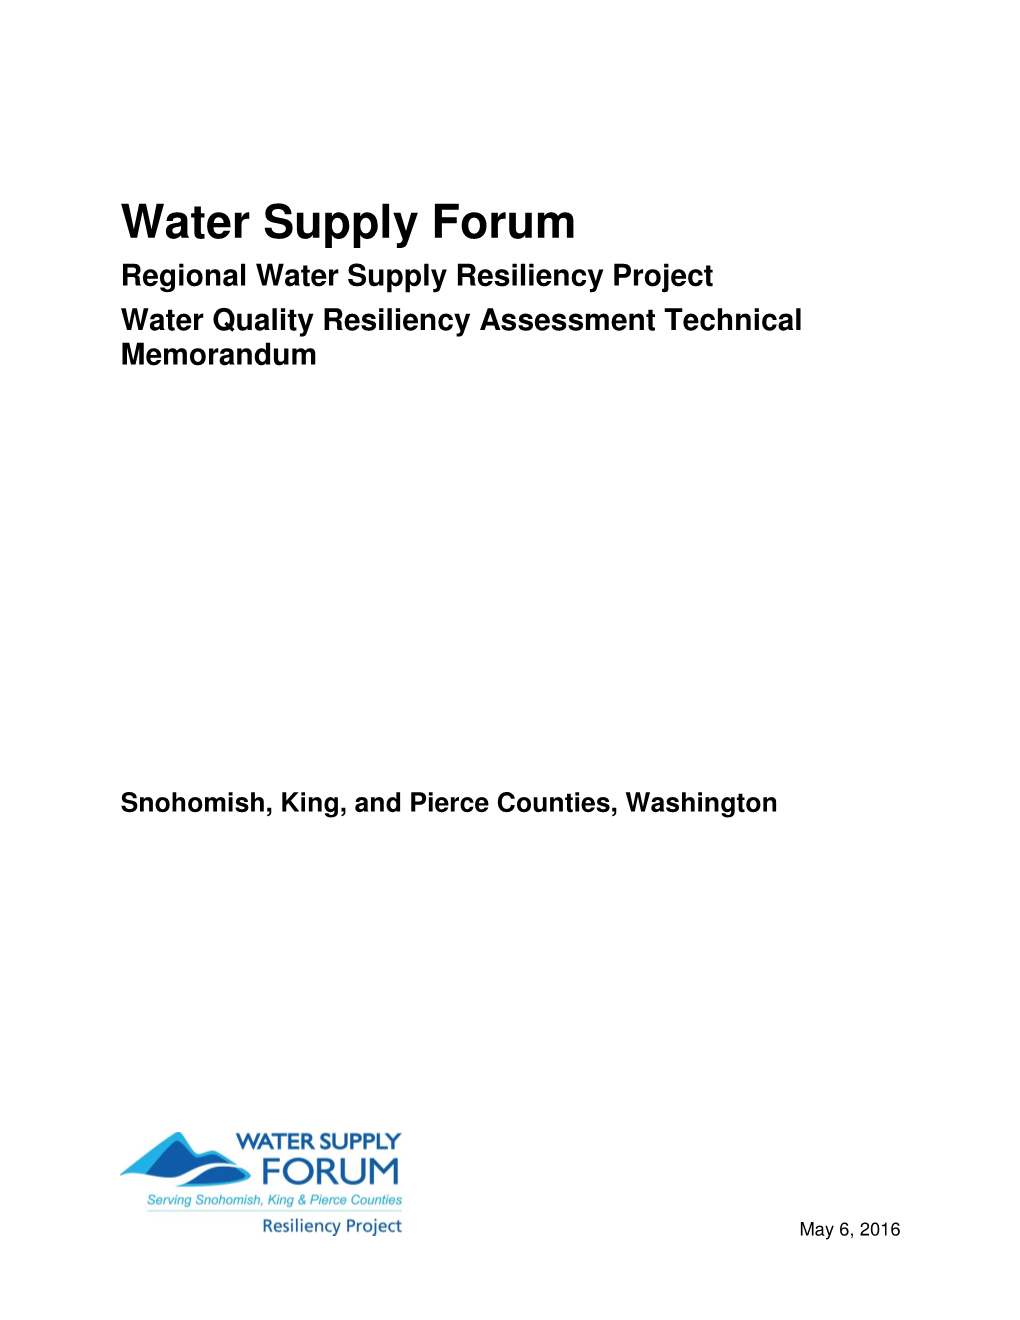 Water Supply Forum Resiliency Project, Water Quality Assessment